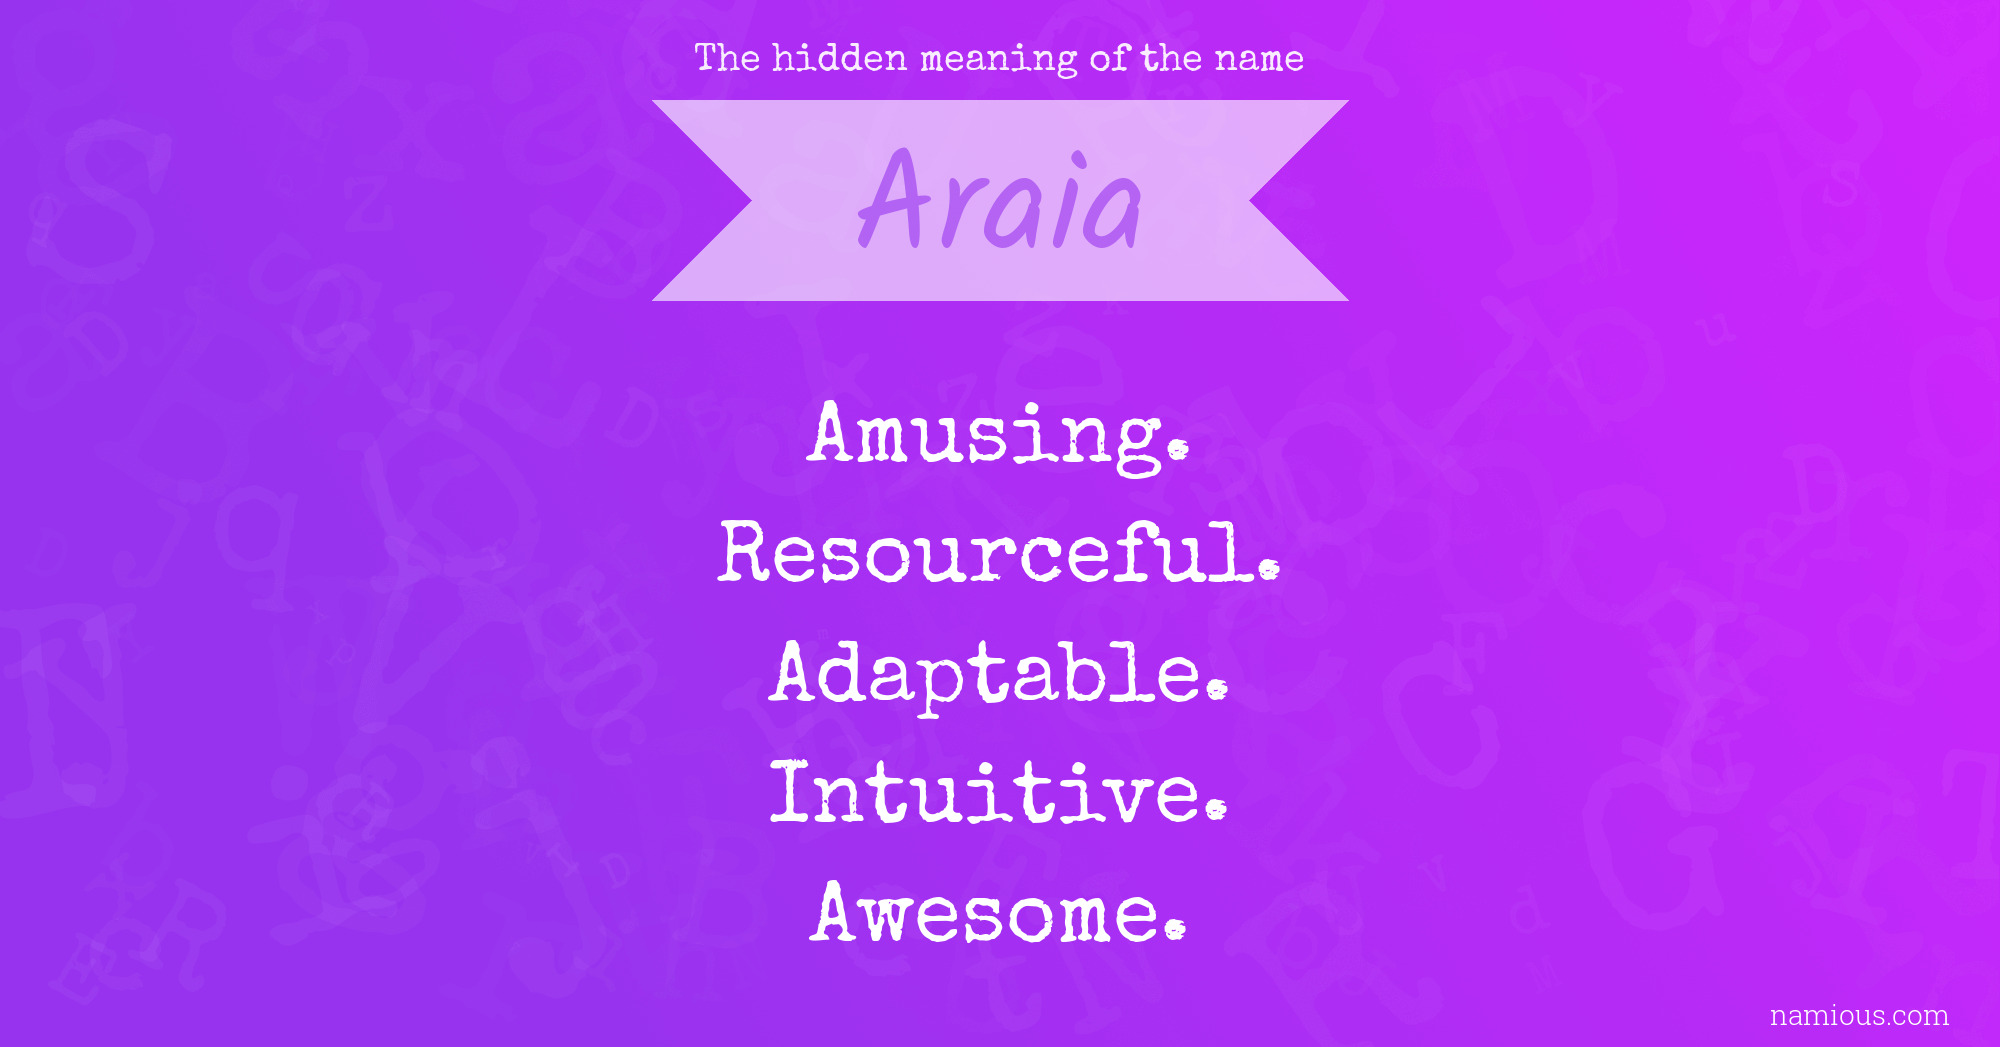 The hidden meaning of the name Araia